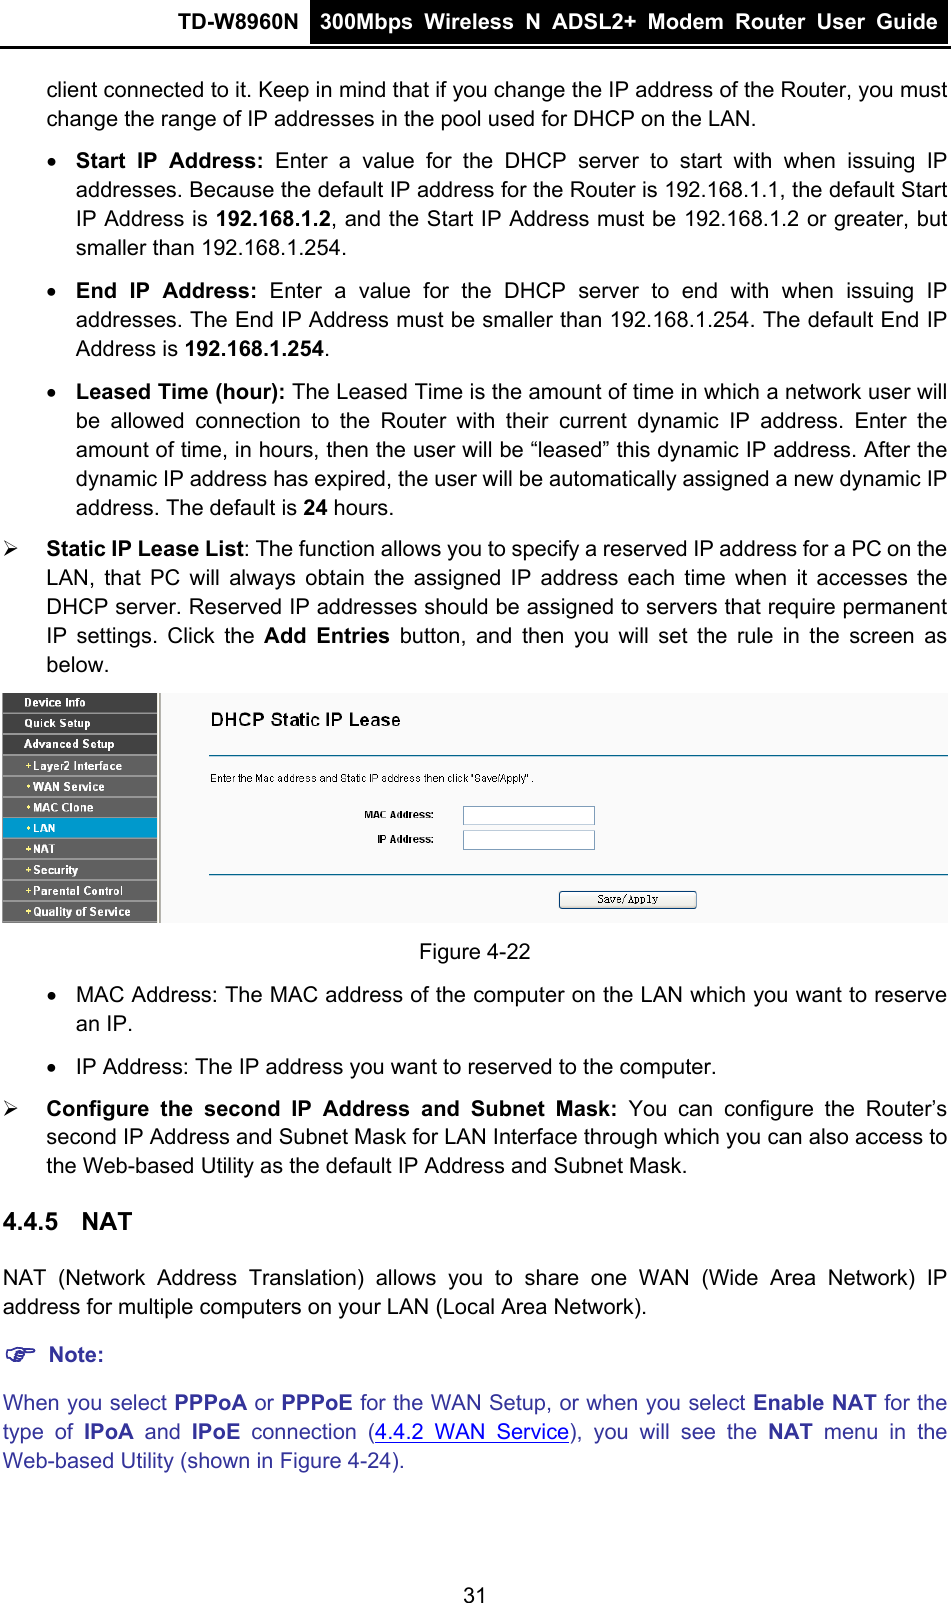 TD-W8960N  300Mbps Wireless N ADSL2+ Modem Router User Guide  client connected to it. Keep in mind that if you change the IP address of the Router, you must change the range of IP addresses in the pool used for DHCP on the LAN.  Start IP Address: Enter a value for the DHCP server to start with when issuing IP addresses. Because the default IP address for the Router is 192.168.1.1, the default Start IP Address is 192.168.1.2, and the Start IP Address must be 192.168.1.2 or greater, but smaller than 192.168.1.254.  End IP Address: Enter a value for the DHCP server to end with when issuing IP addresses. The End IP Address must be smaller than 192.168.1.254. The default End IP Address is 192.168.1.254.  Leased Time (hour): The Leased Time is the amount of time in which a network user will be allowed connection to the Router with their current dynamic IP address. Enter the amount of time, in hours, then the user will be “leased” this dynamic IP address. After the dynamic IP address has expired, the user will be automatically assigned a new dynamic IP address. The default is 24 hours.  Static IP Lease List: The function allows you to specify a reserved IP address for a PC on the LAN, that PC will always obtain the assigned IP address each time when it accesses the DHCP server. Reserved IP addresses should be assigned to servers that require permanent IP settings. Click the Add Entries button, and then you will set the rule in the screen as below.  Figure 4-22   MAC Address: The MAC address of the computer on the LAN which you want to reserve an IP.   IP Address: The IP address you want to reserved to the computer.  Configure the second IP Address and Subnet Mask: You can configure the Router’s second IP Address and Subnet Mask for LAN Interface through which you can also access to the Web-based Utility as the default IP Address and Subnet Mask. 4.4.5  NAT NAT (Network Address Translation) allows you to share one WAN (Wide Area Network) IP address for multiple computers on your LAN (Local Area Network).  Note: When you select PPPoA or PPPoE for the WAN Setup, or when you select Enable NAT for the type of IPoA and IPoE  connection (4.4.2 WAN Service), you will see the NAT menu in the Web-based Utility (shown in Figure 4-24). 31 